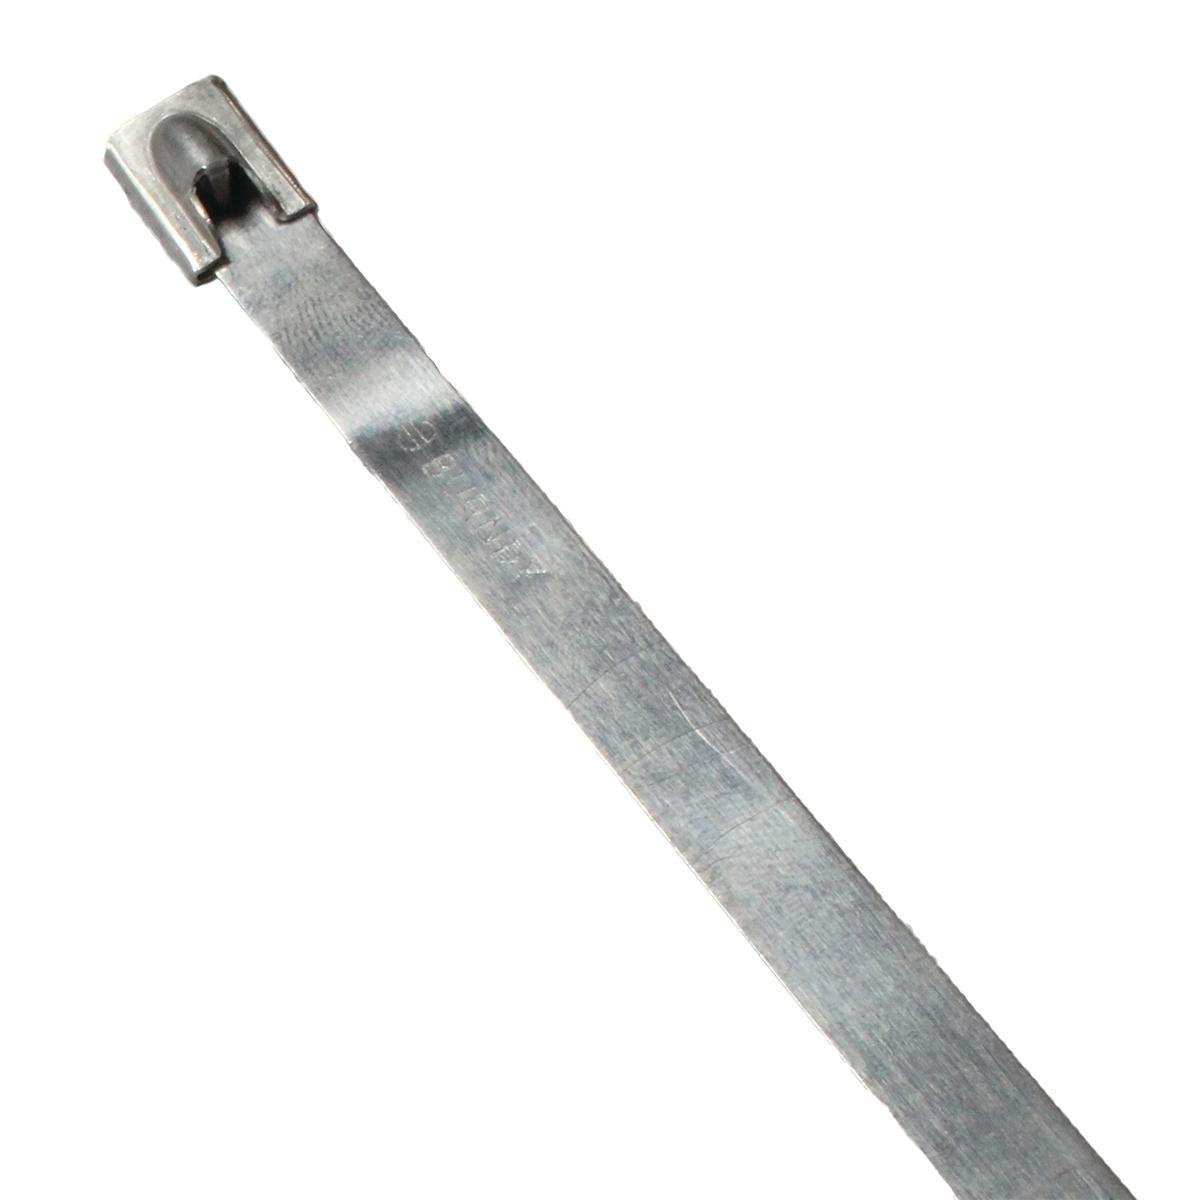 Hubbell CTSS500300316C Uncoated stainless steel cable ties 316 grade, Tensile strength: 500 Lb, 11.81" L, 0.31" W, 3.00" Bundle Dia.  ; Smooth, rounded edges help ensure safe, efficient handling ; Ergonomically designed installation tools consistently tensions and cuts off ties